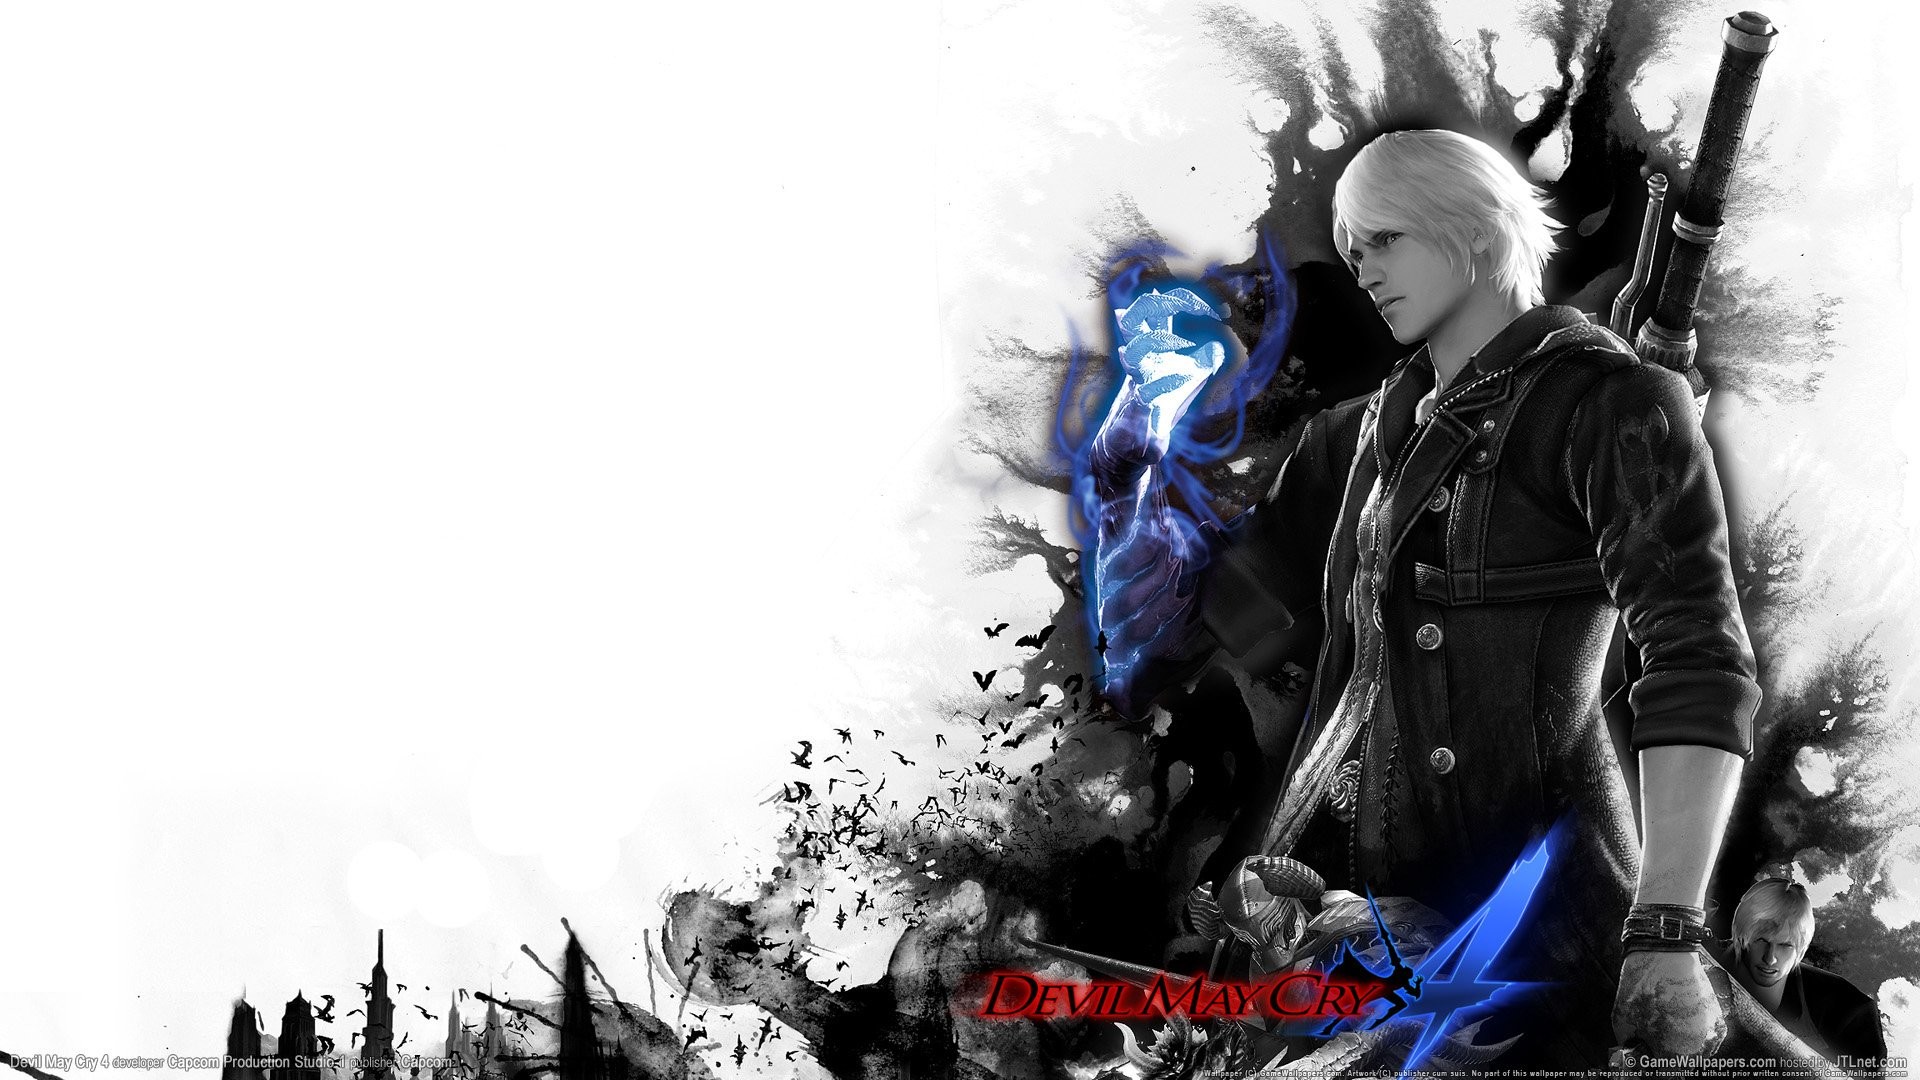 1920x1080 Devil May Cry 4 HD Wallpapers